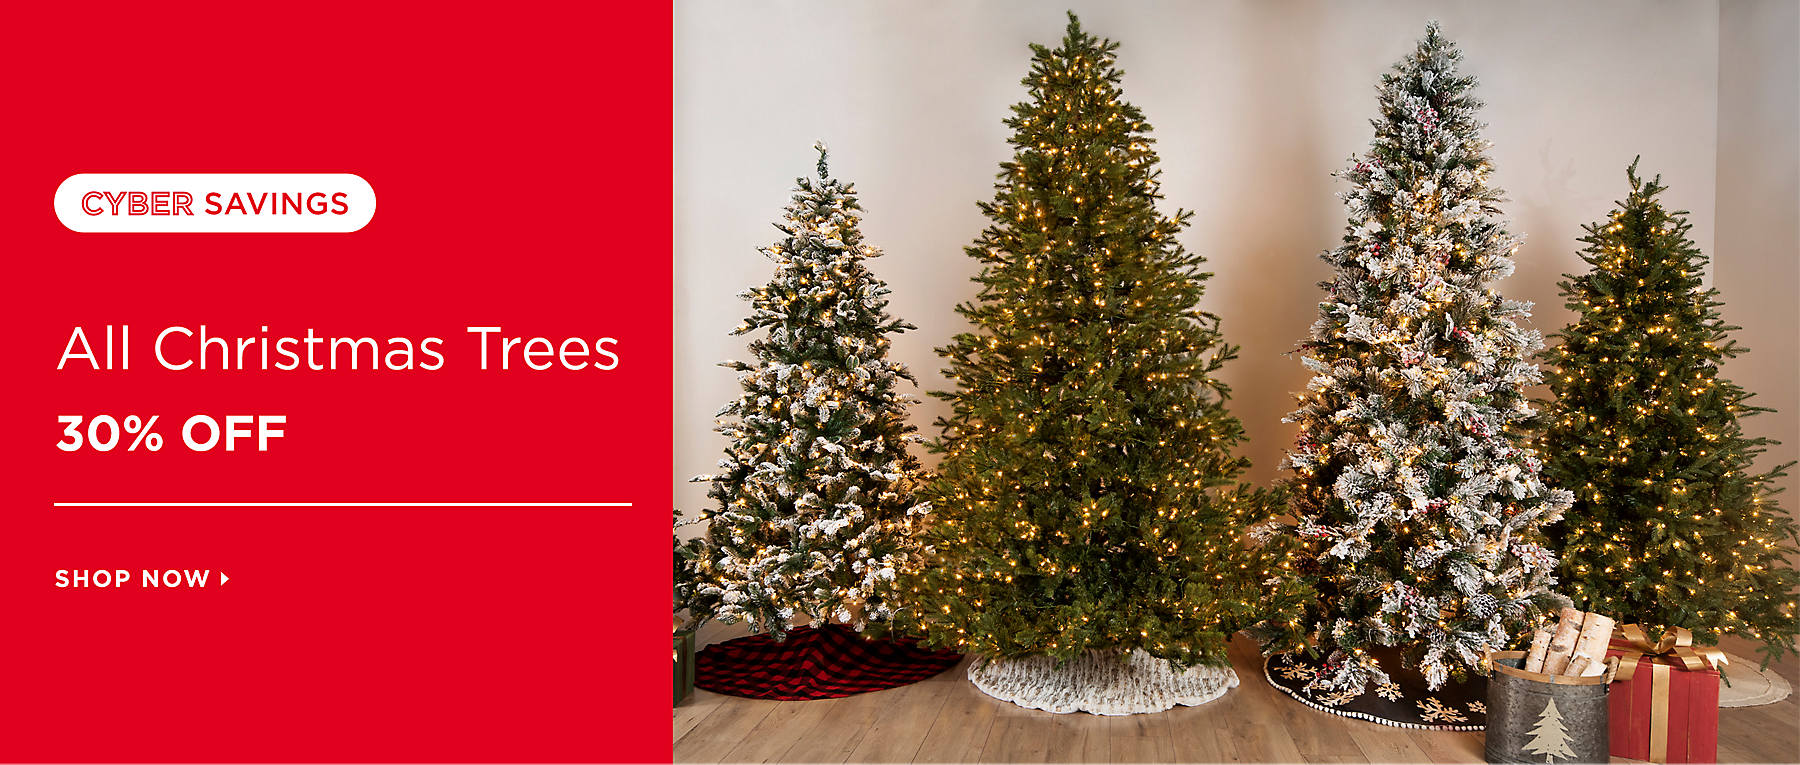 Cyber Savings All Christmas Trees 30% Off Shop Now